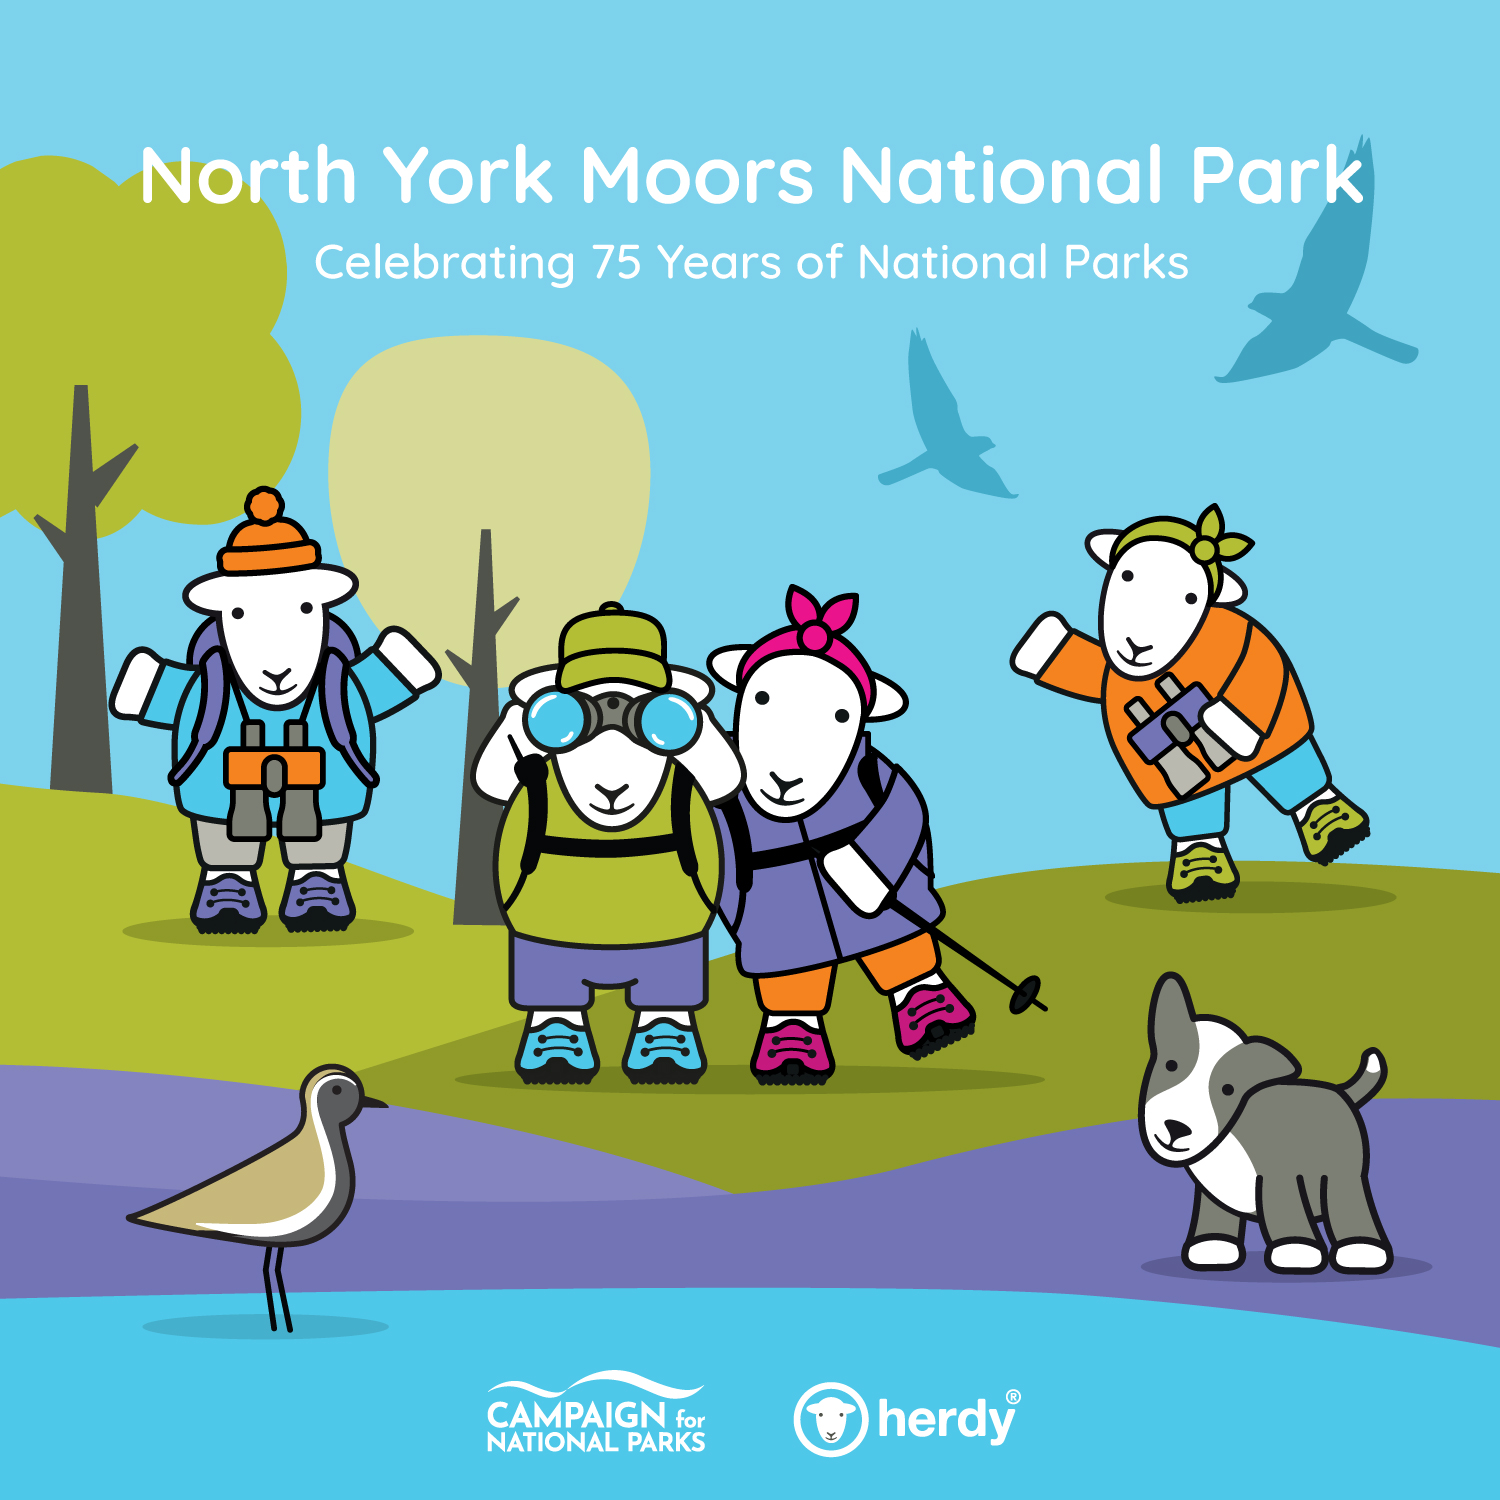 herdy in the North York Moors National Park, celebrating 75 years of National Parks